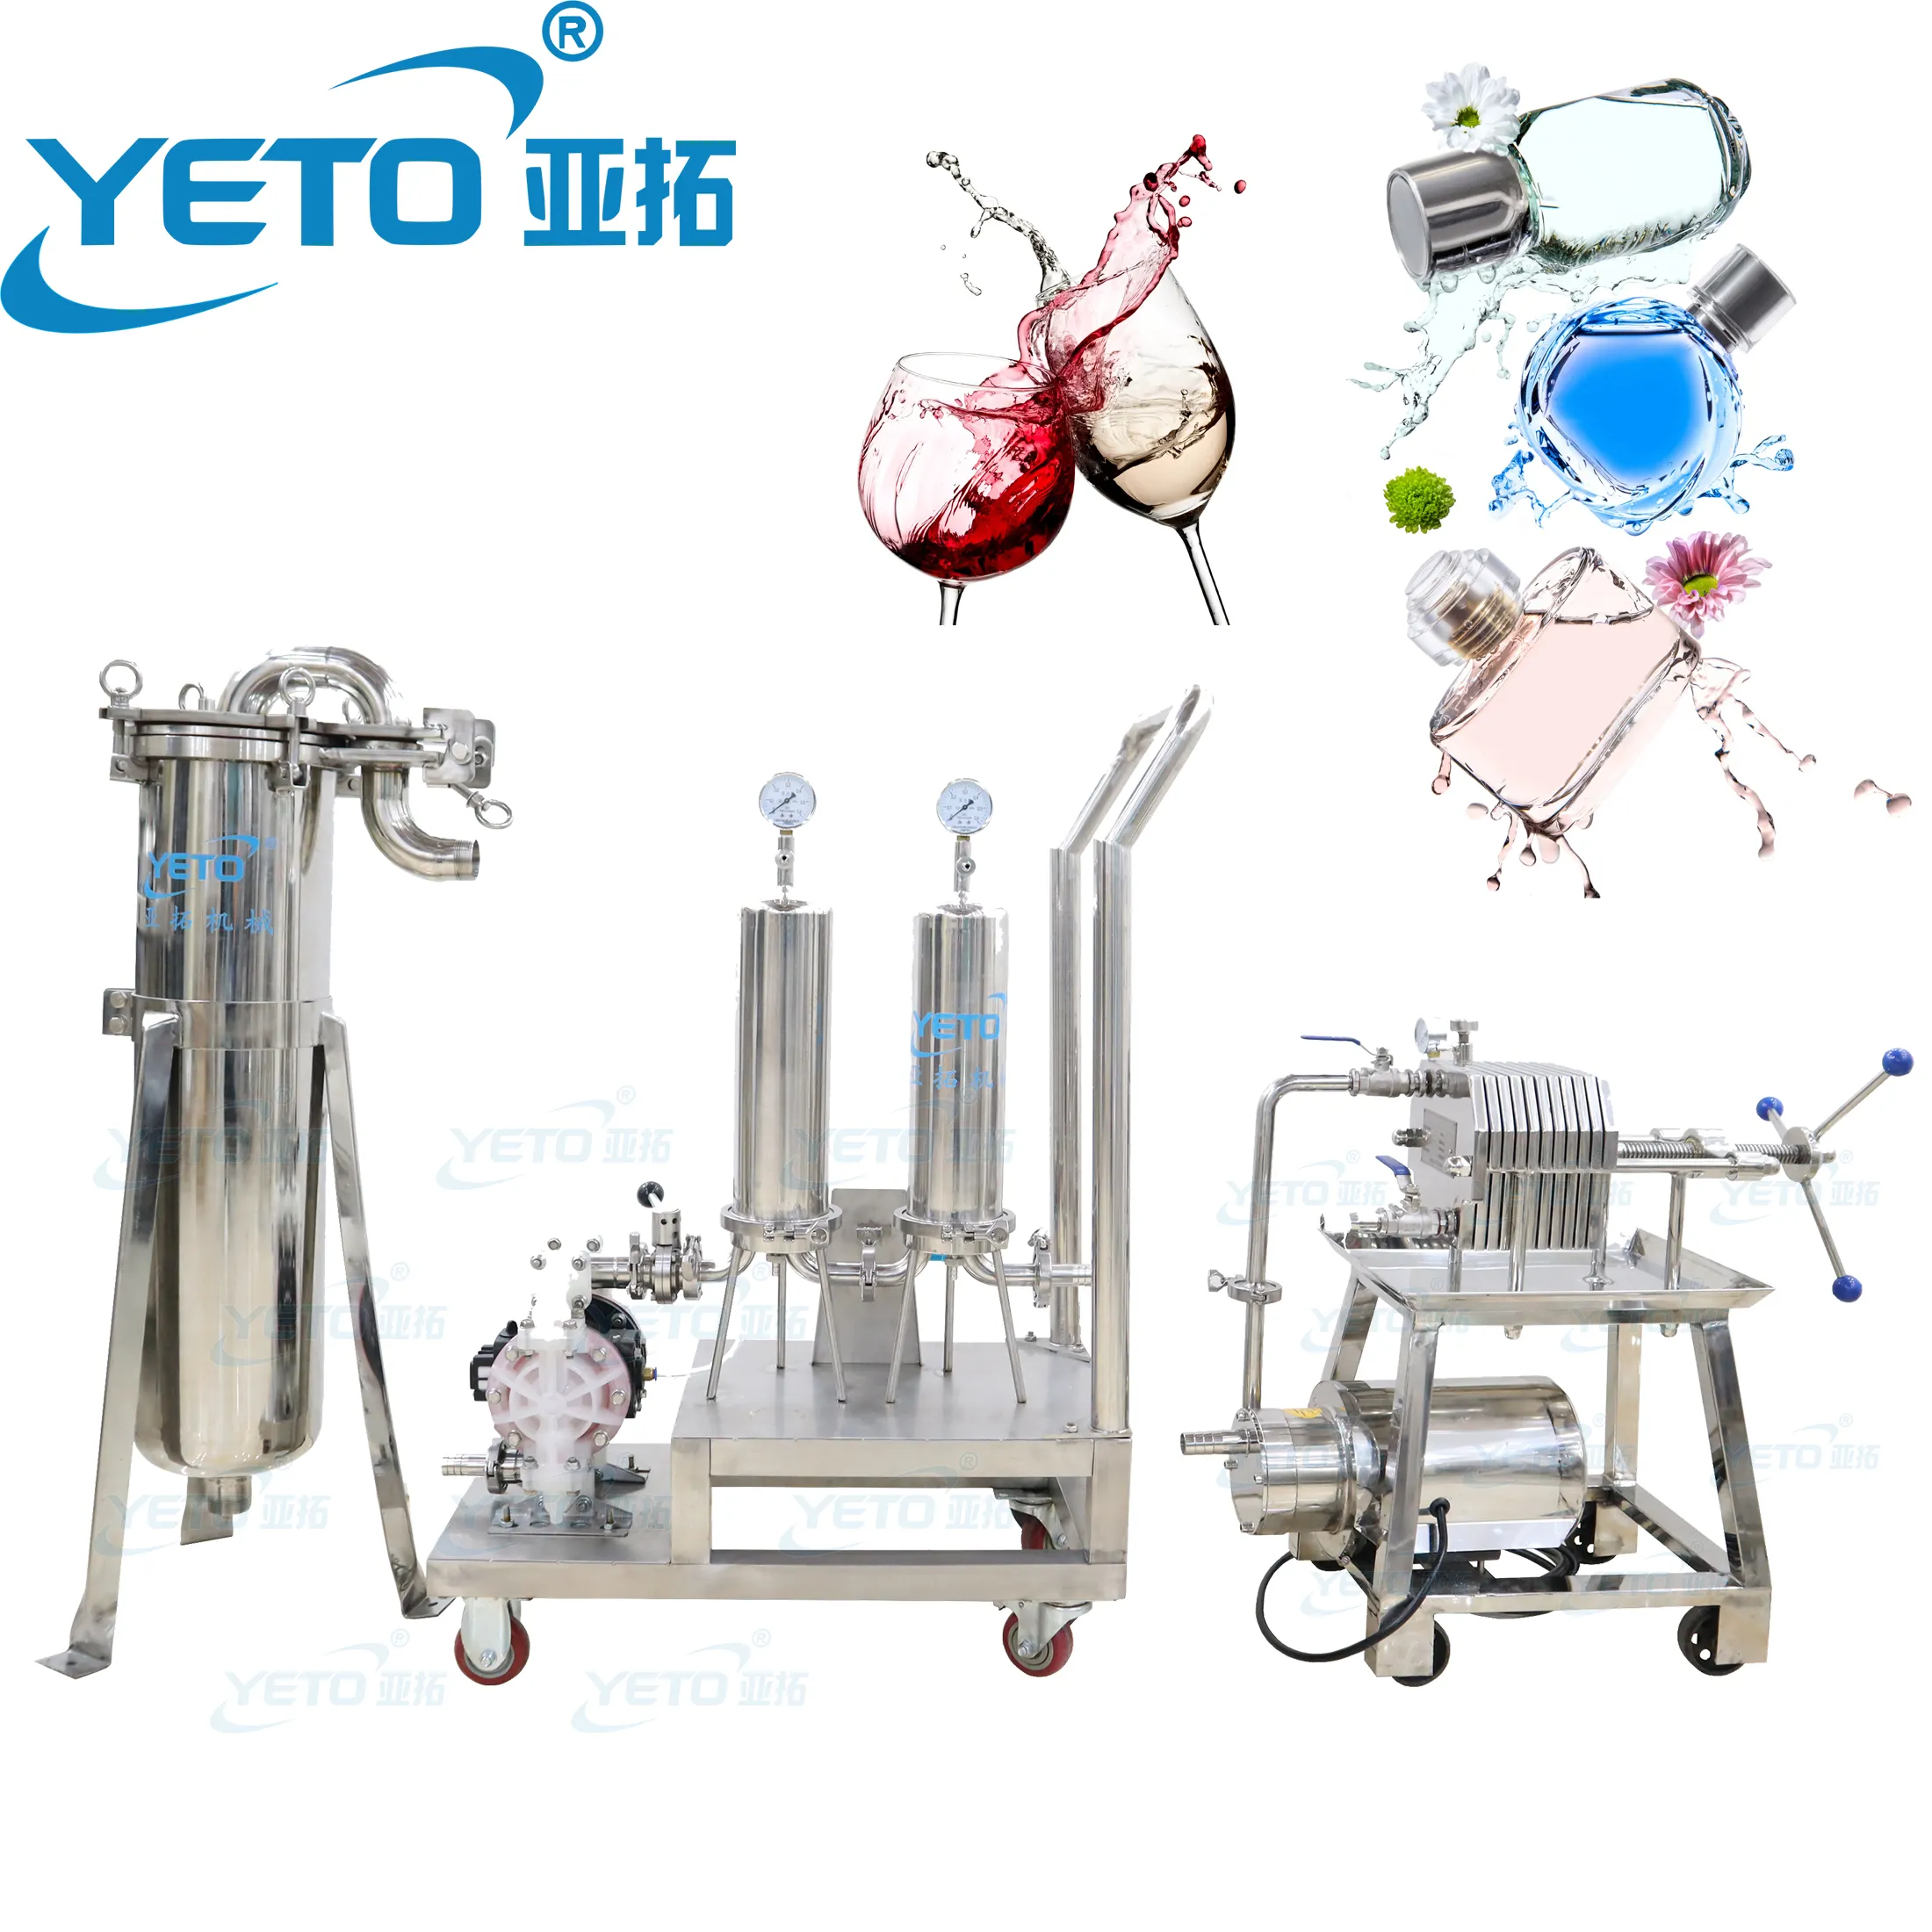 YETO-100-1000L Perfume Fragrance Milk Filter Beverage Small Scale Stainless Steel Water Rum Filter Machine